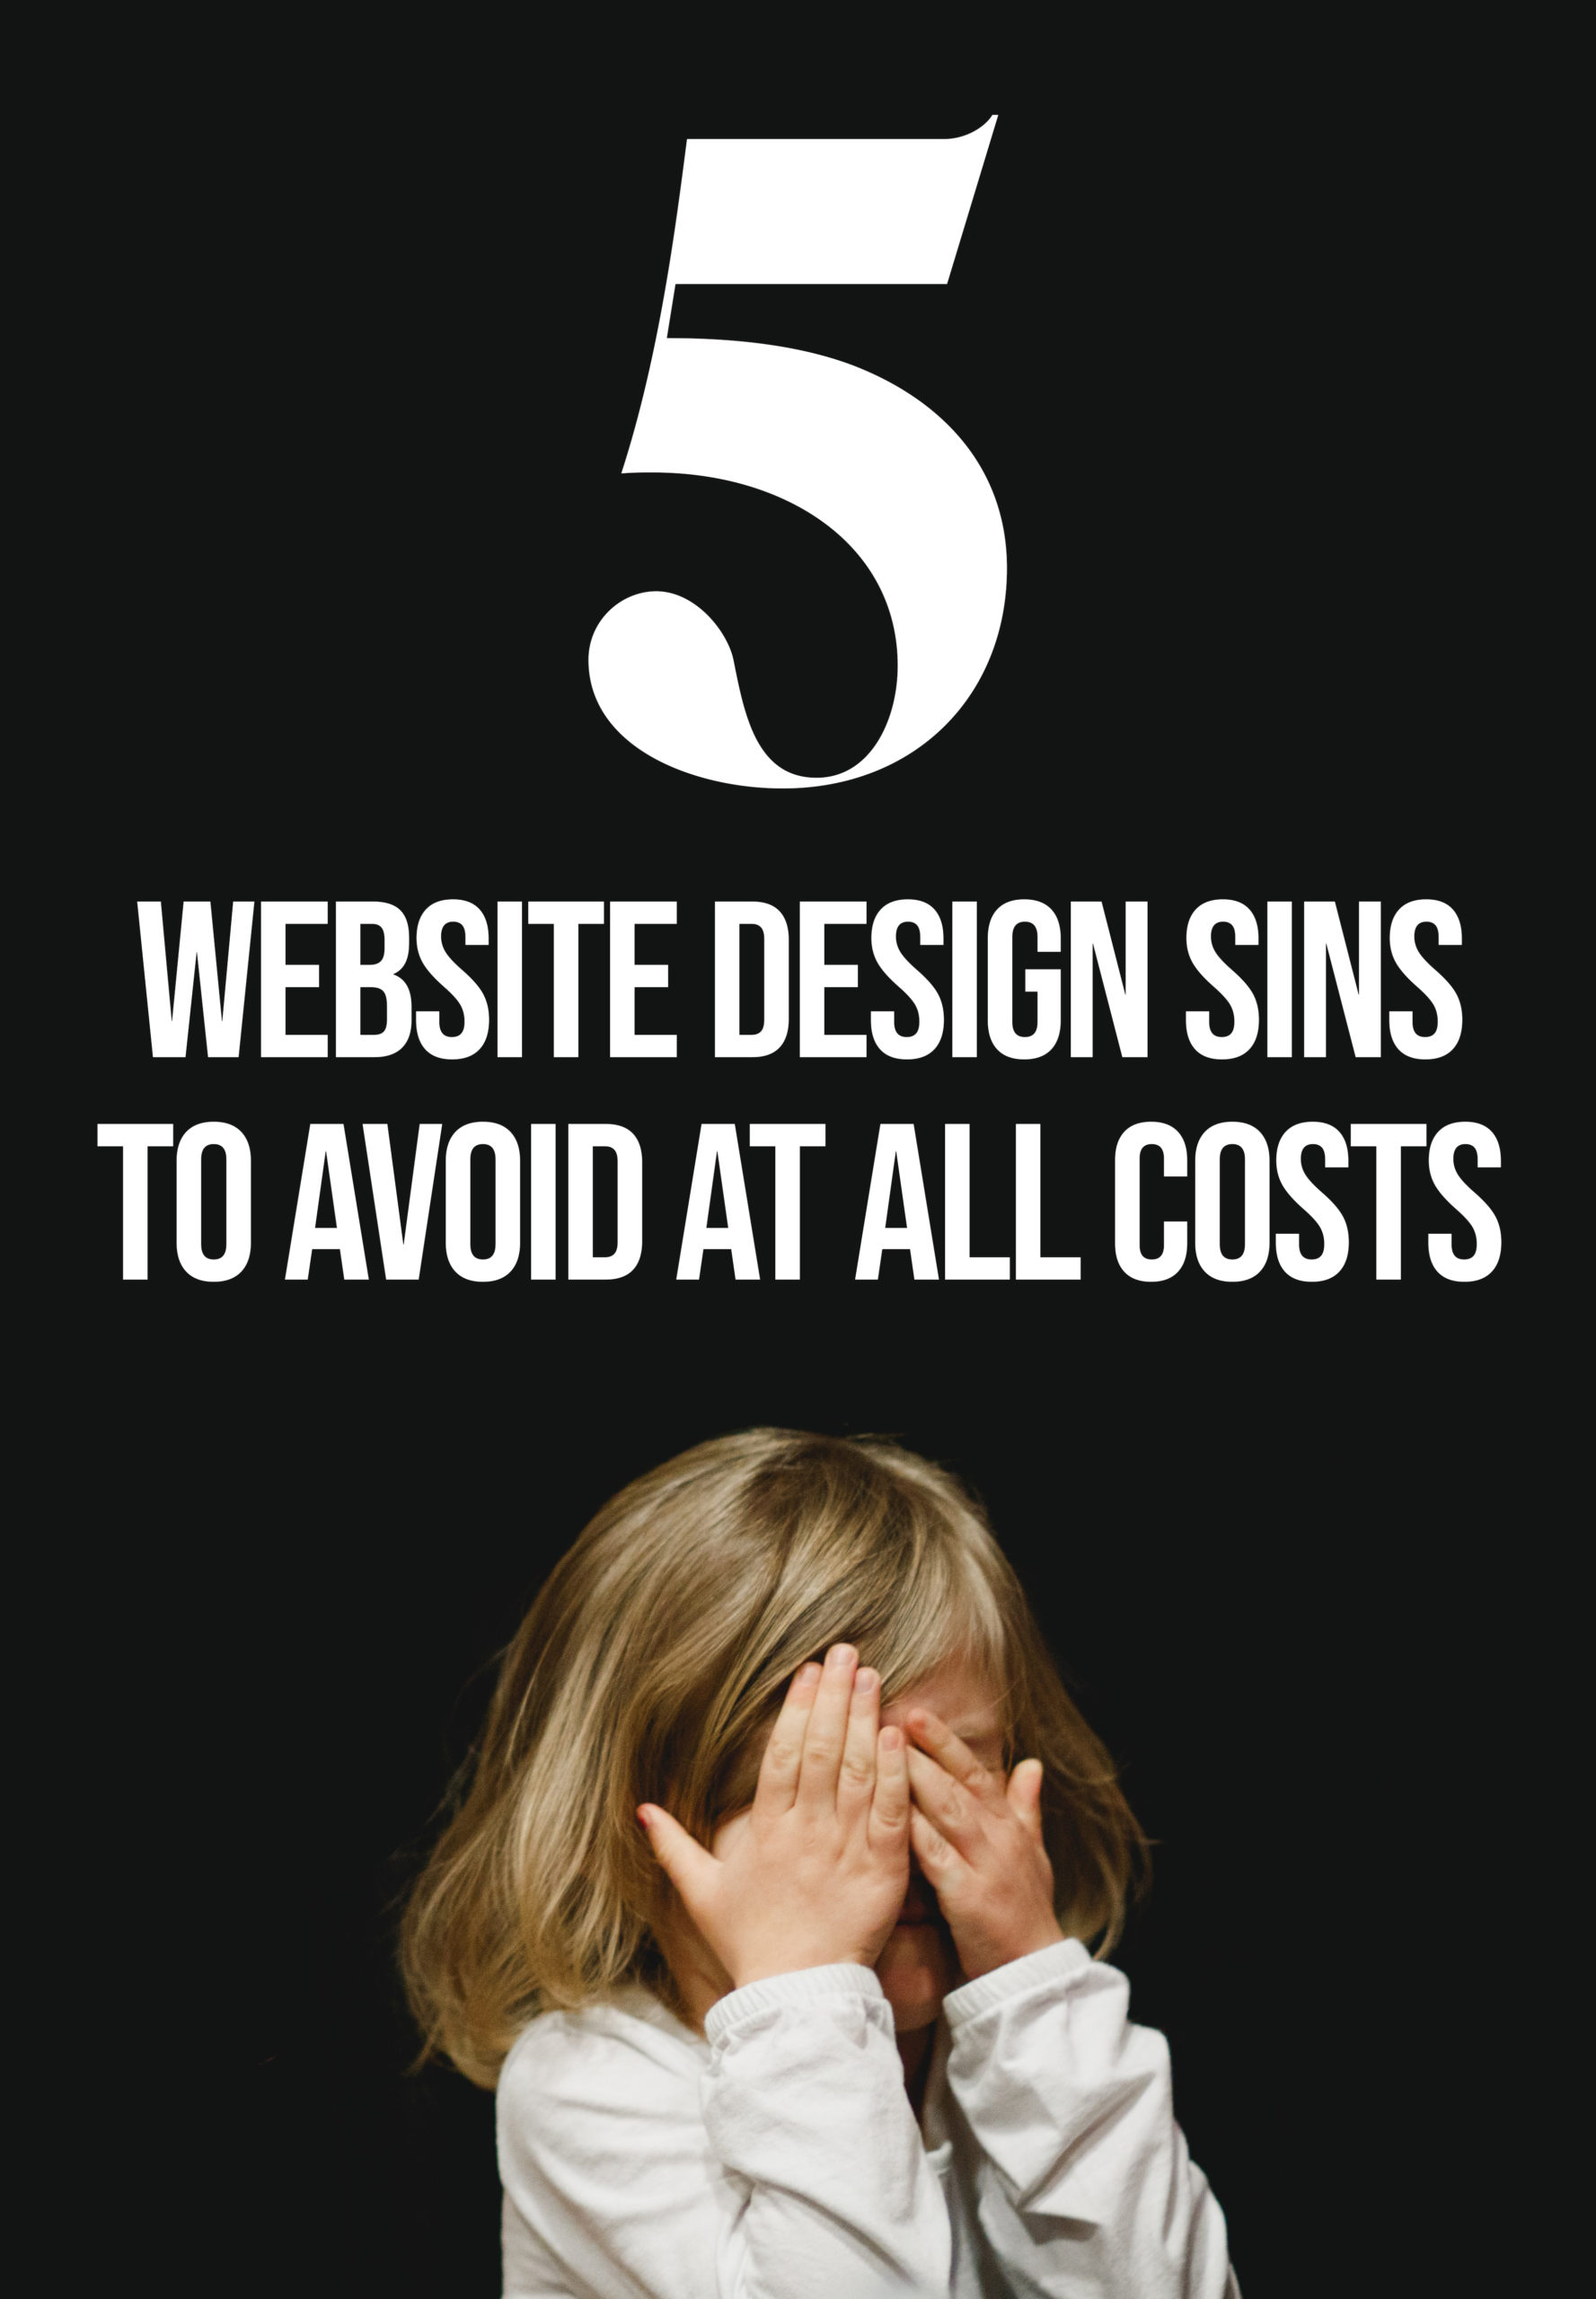 5 five website design sins to avoid at all costs